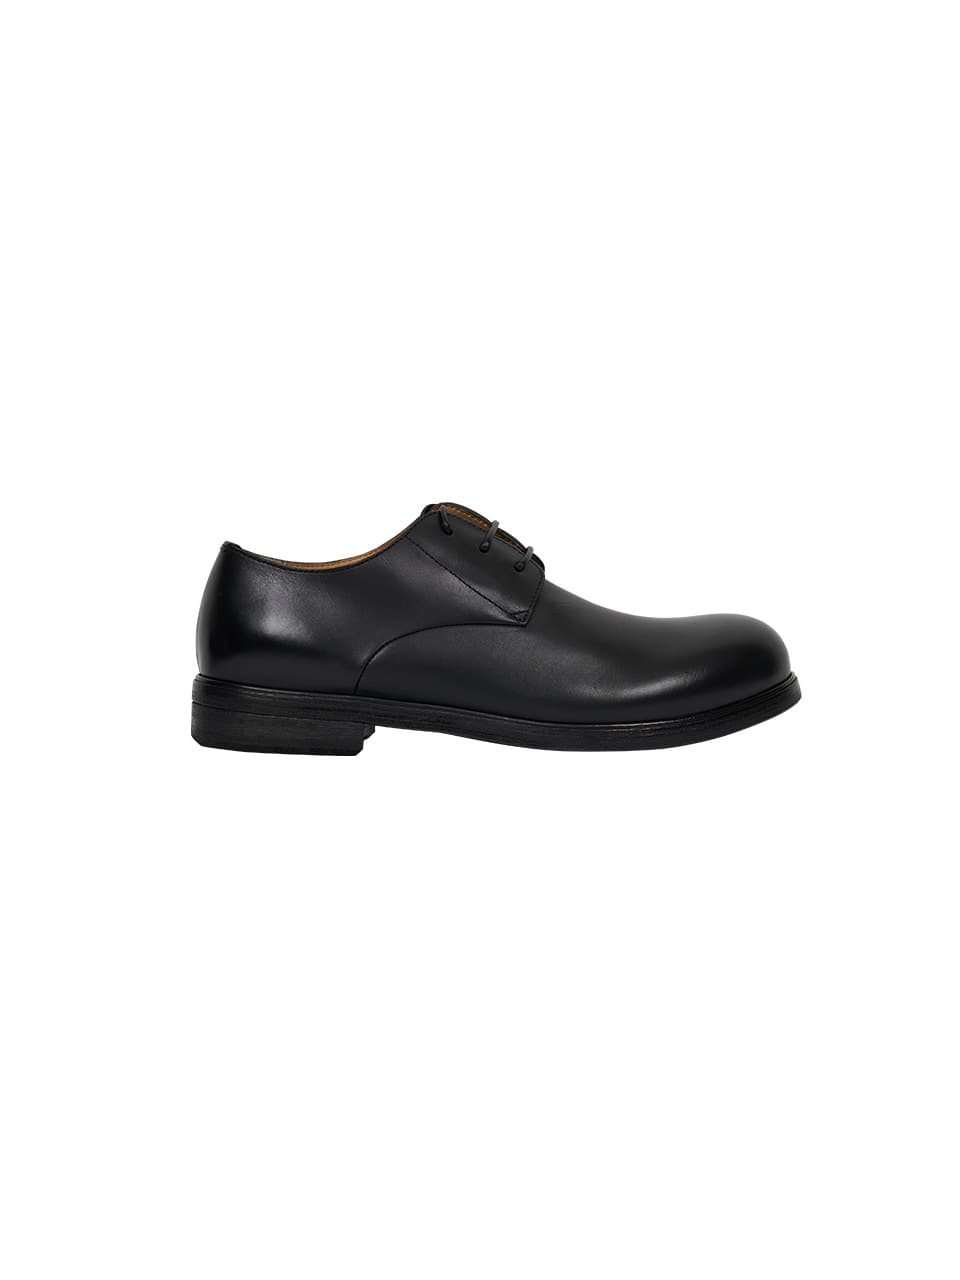 MARSELL - ZUCCA MEDIA LEATHER DERBY SHOES (BLACK)